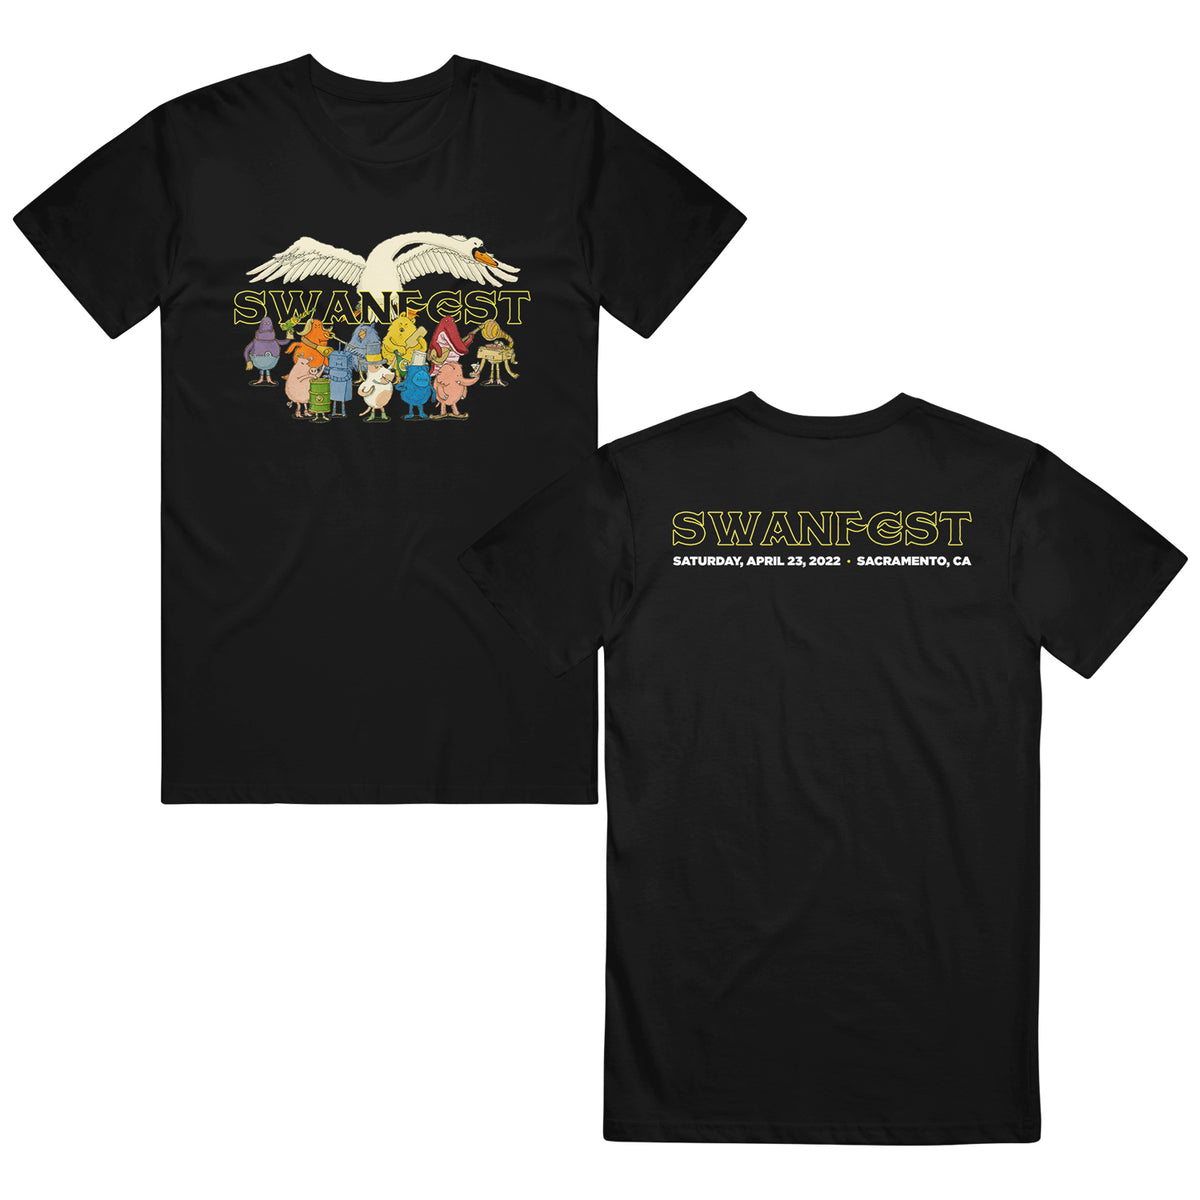 image of a the front and back of a black tee shirt on a white background. the front of the tee is on the left and has a full chest print of a white swan with swantfest written in yellow below and below that are 12 multicolored characters. the back of the tee is on the right and has a print along the top that says in yellow swanfest,  and bellow that in white says saturday april 23, 2022 sacramento, california 